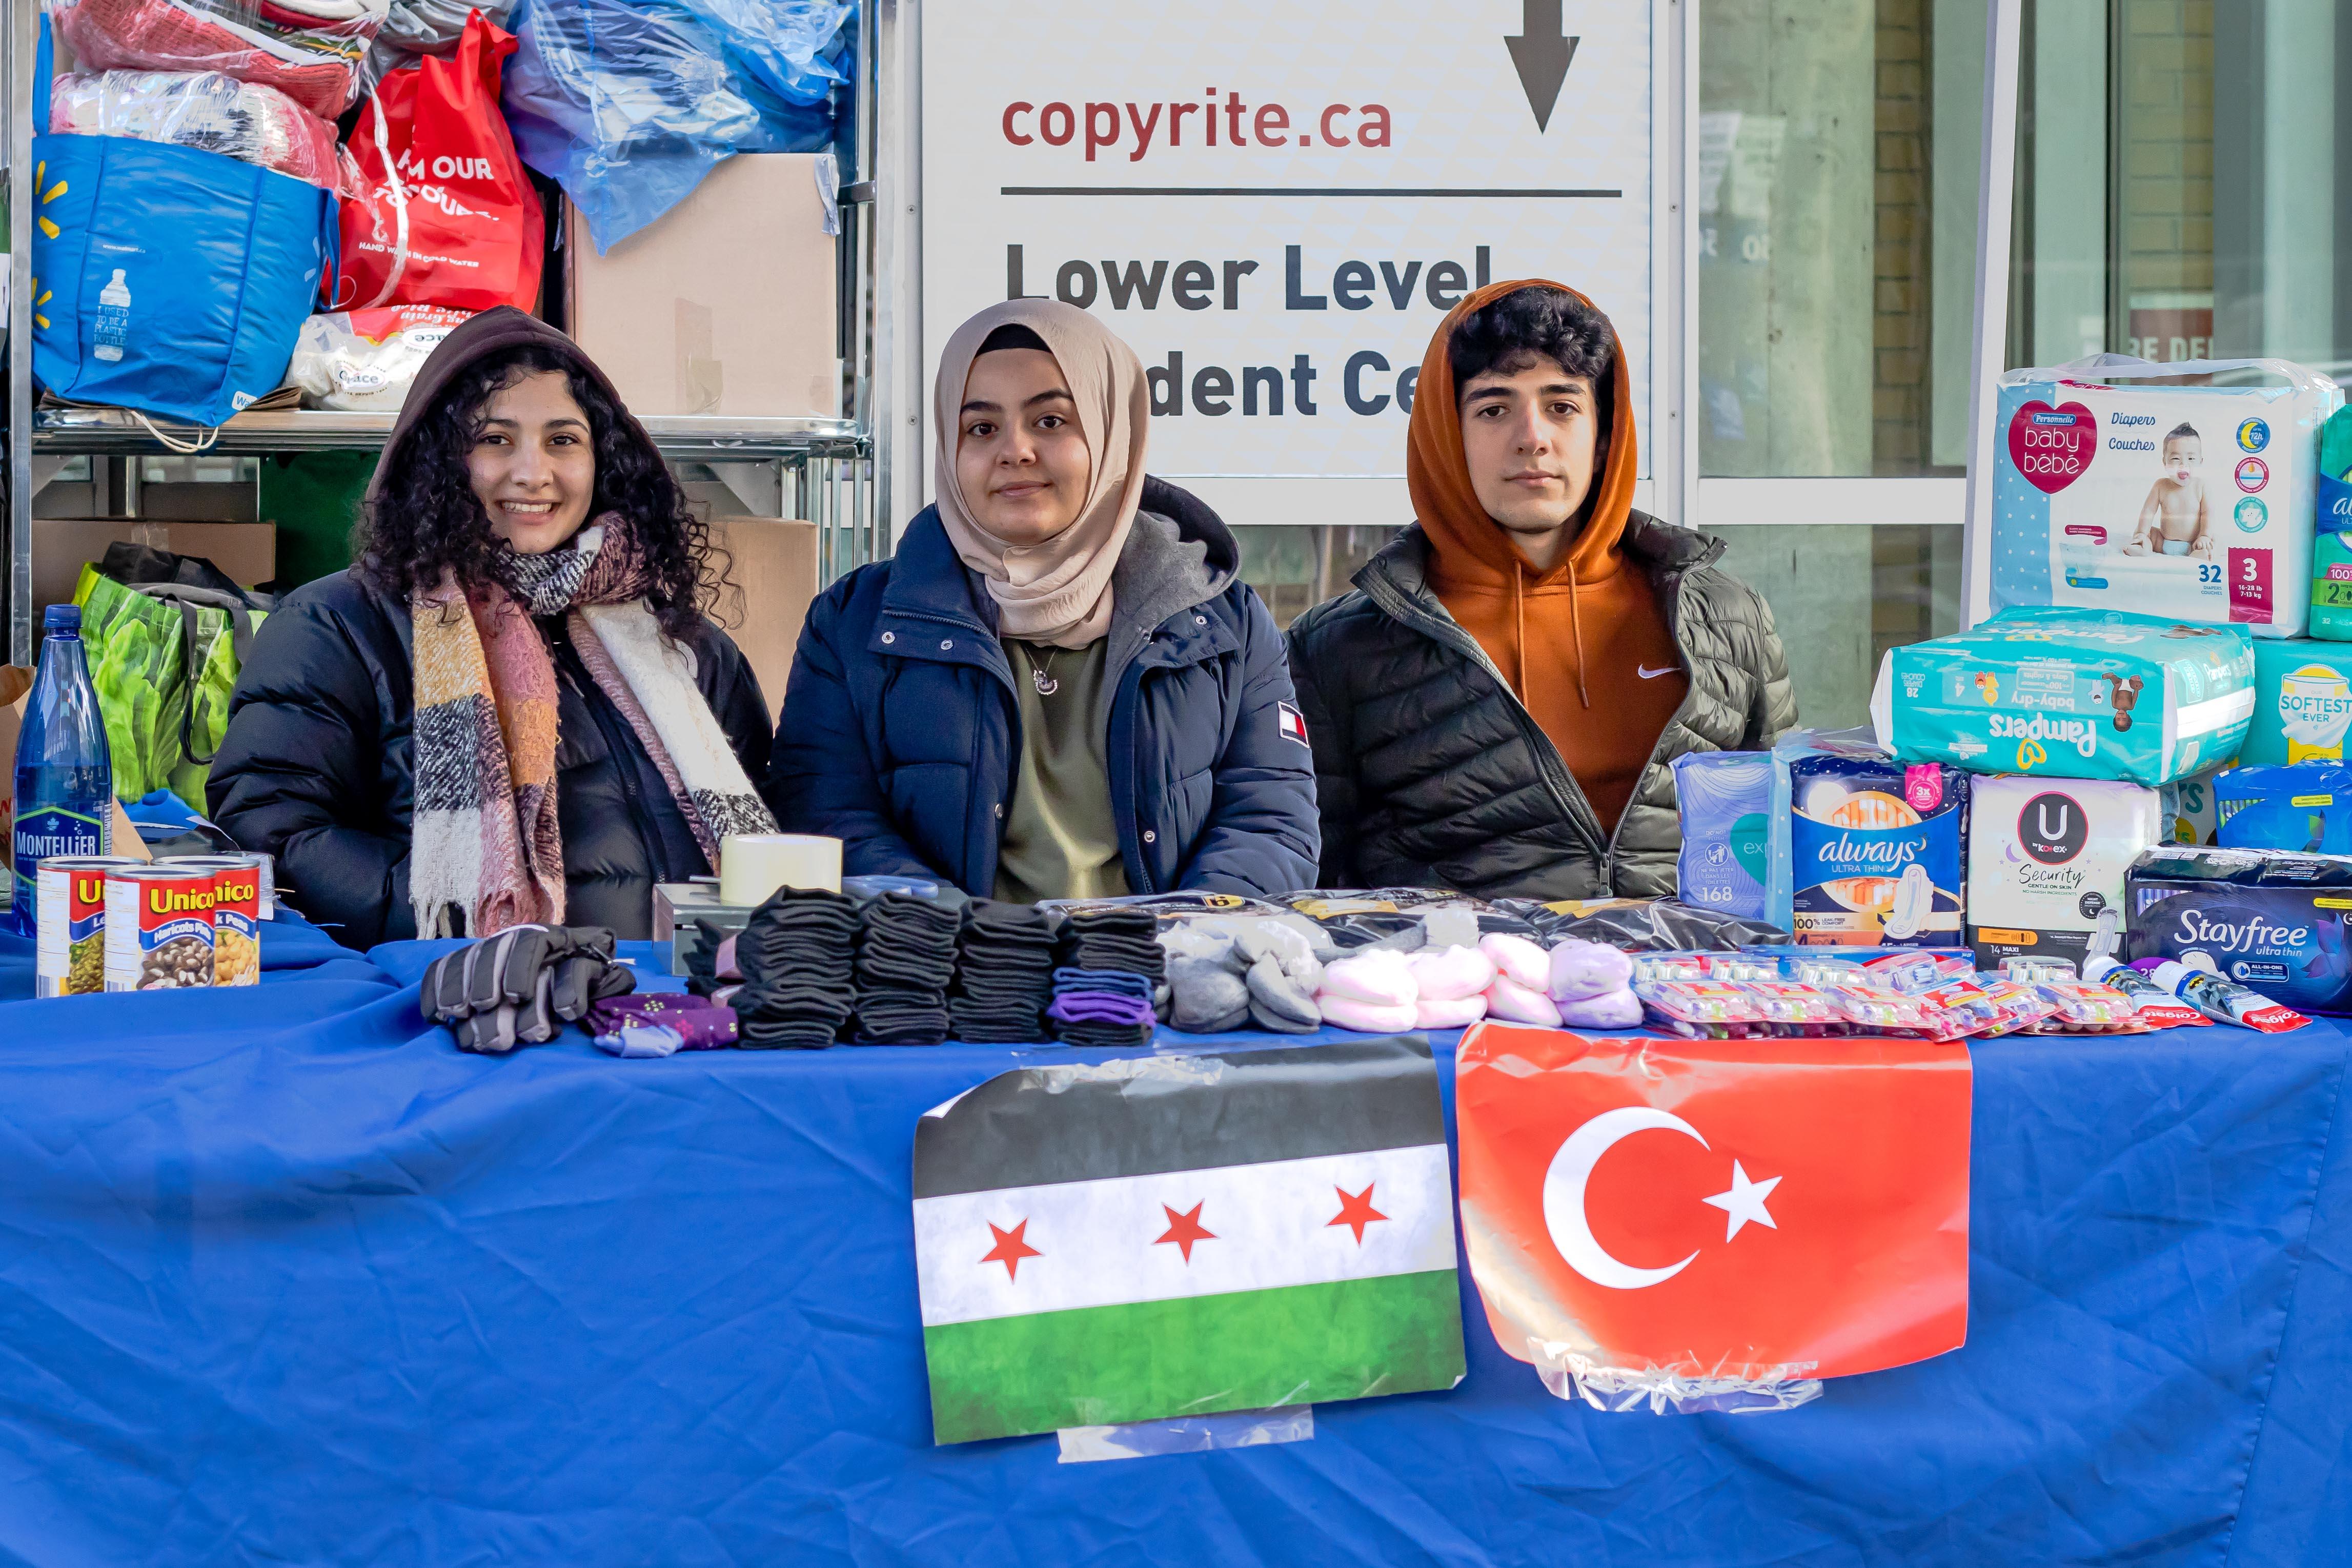 Three people sitting behind a stand, surrounded by canned goods, diapers, socks and other essential household items. A Syria and Turkey flag is taped to the table.